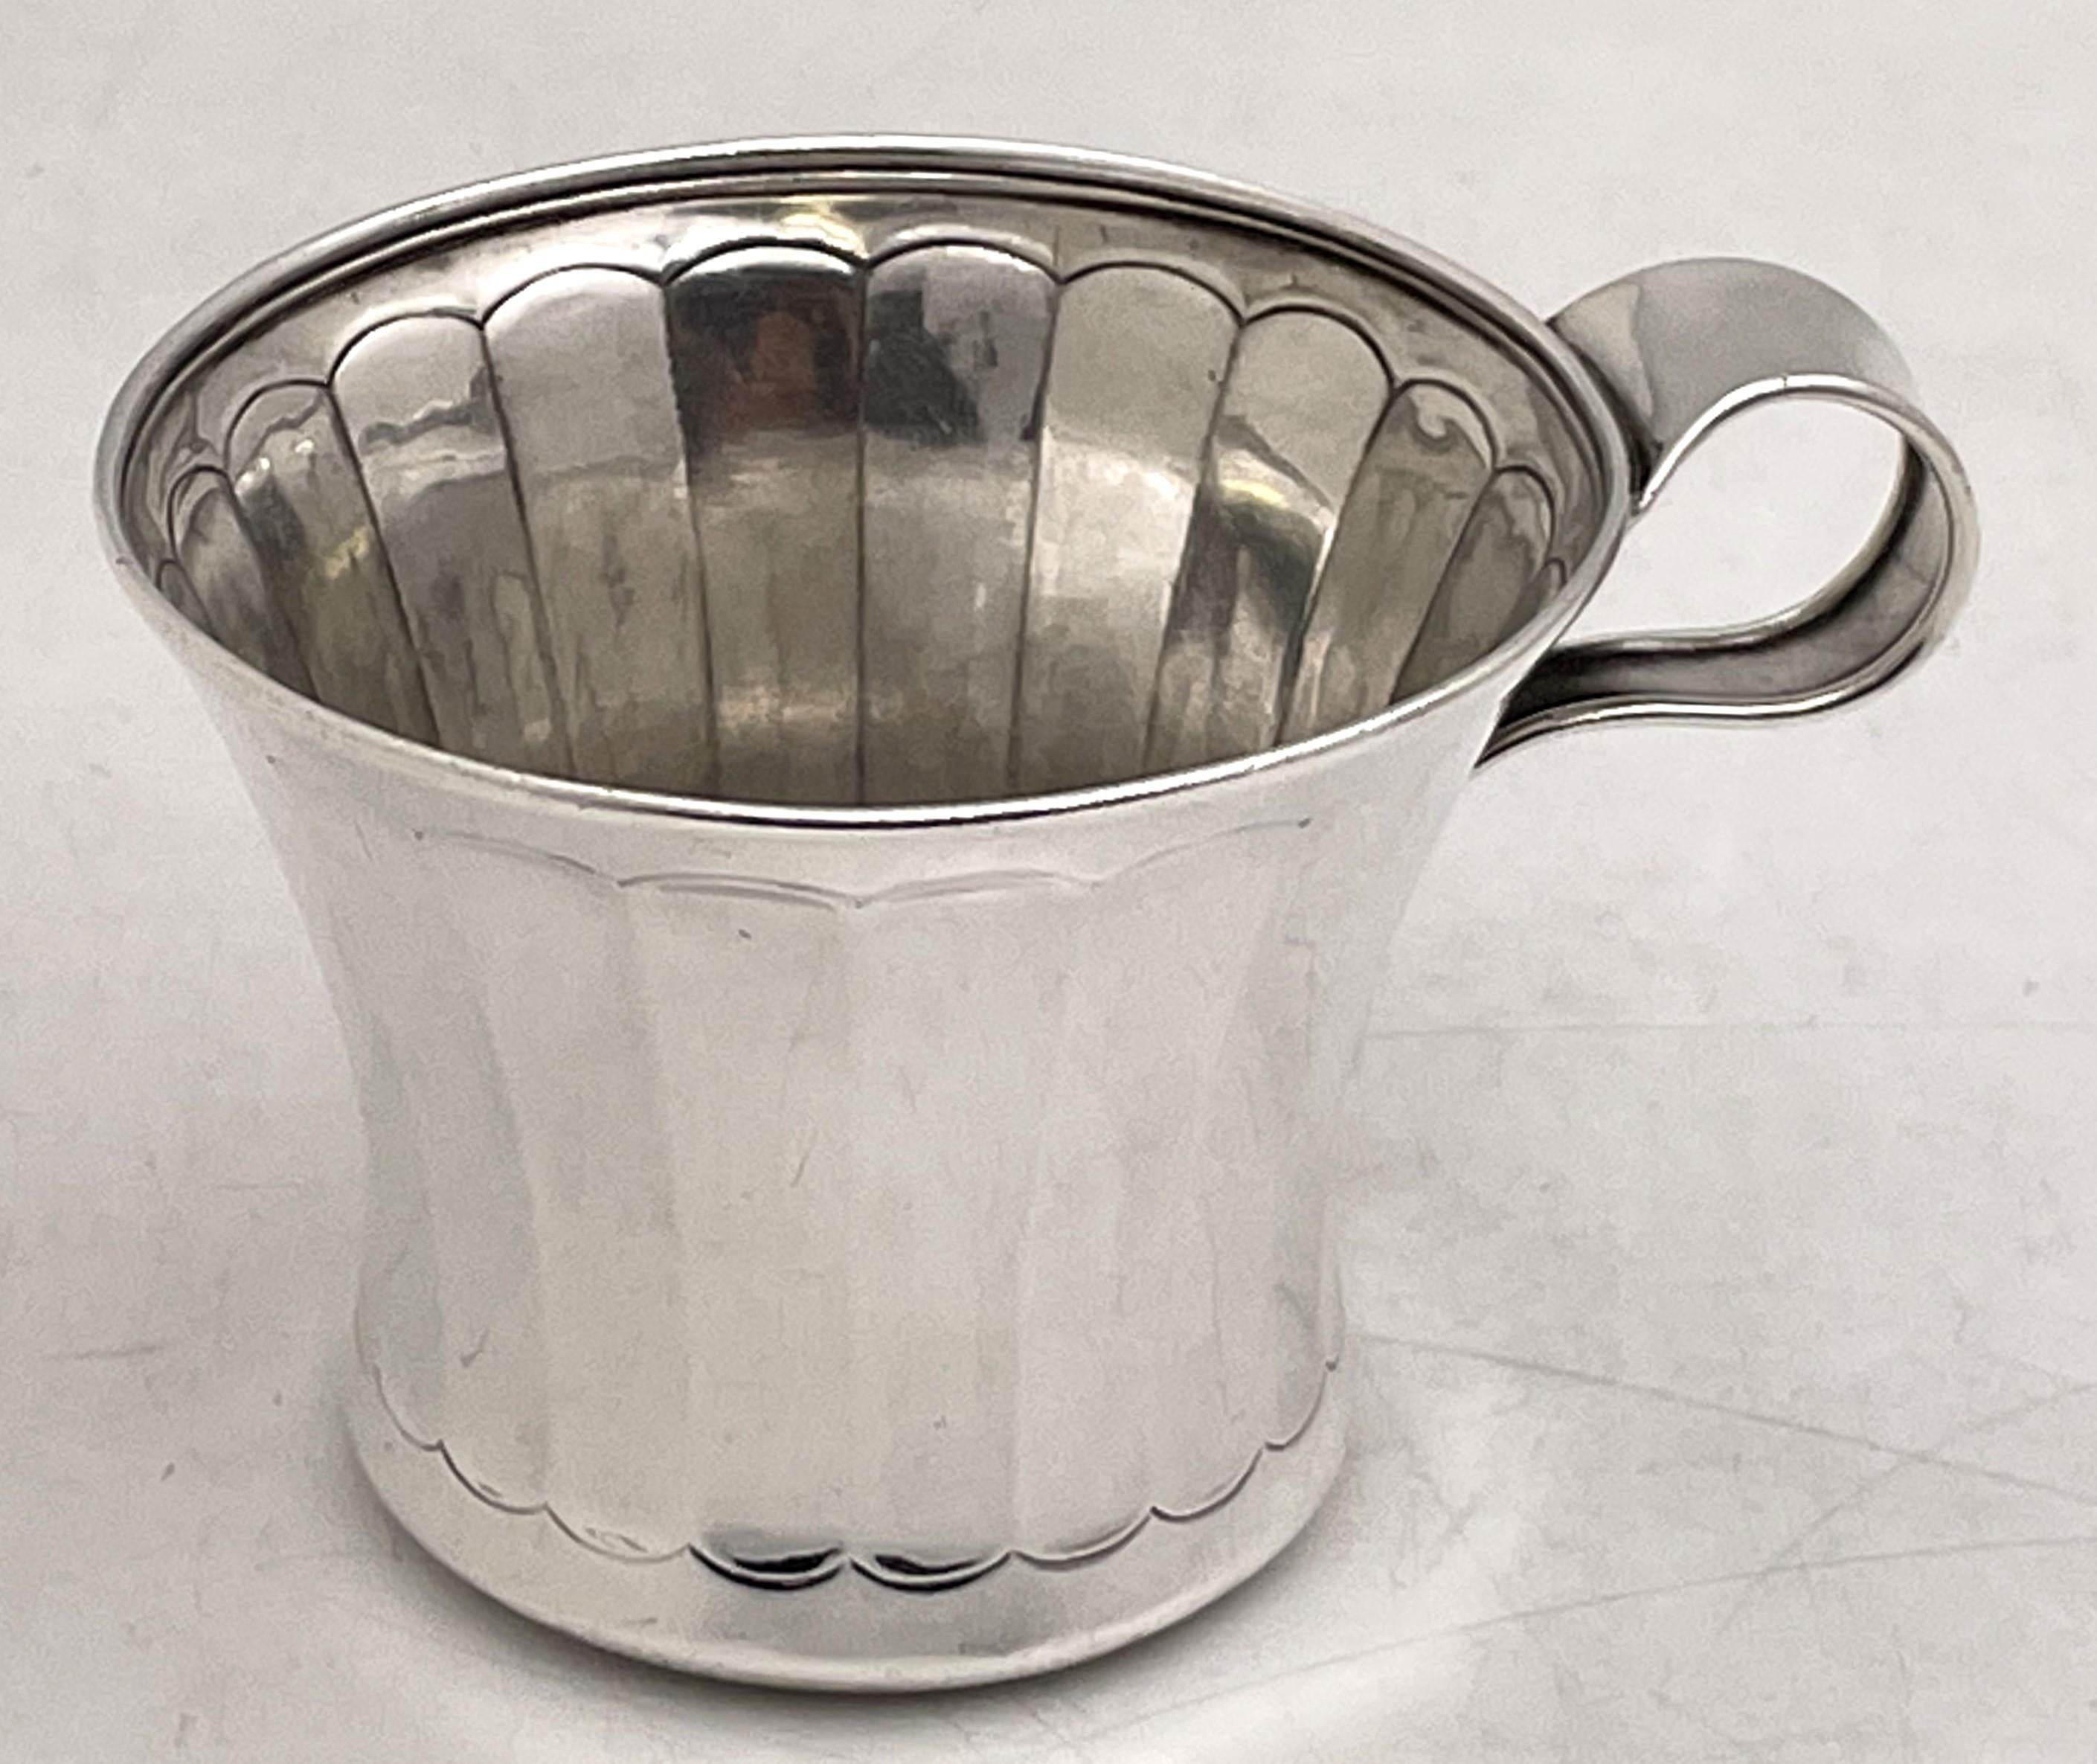 Tiffany & Co. sterling silver child mug in pattern number 17270 from 1908 in Art Deco style with an elegant, geometric design, and with special hand work. It measures 2 2/3'' in height by 3 3/8'' in diameter at the top, weighs 3.8 troy ounces, and